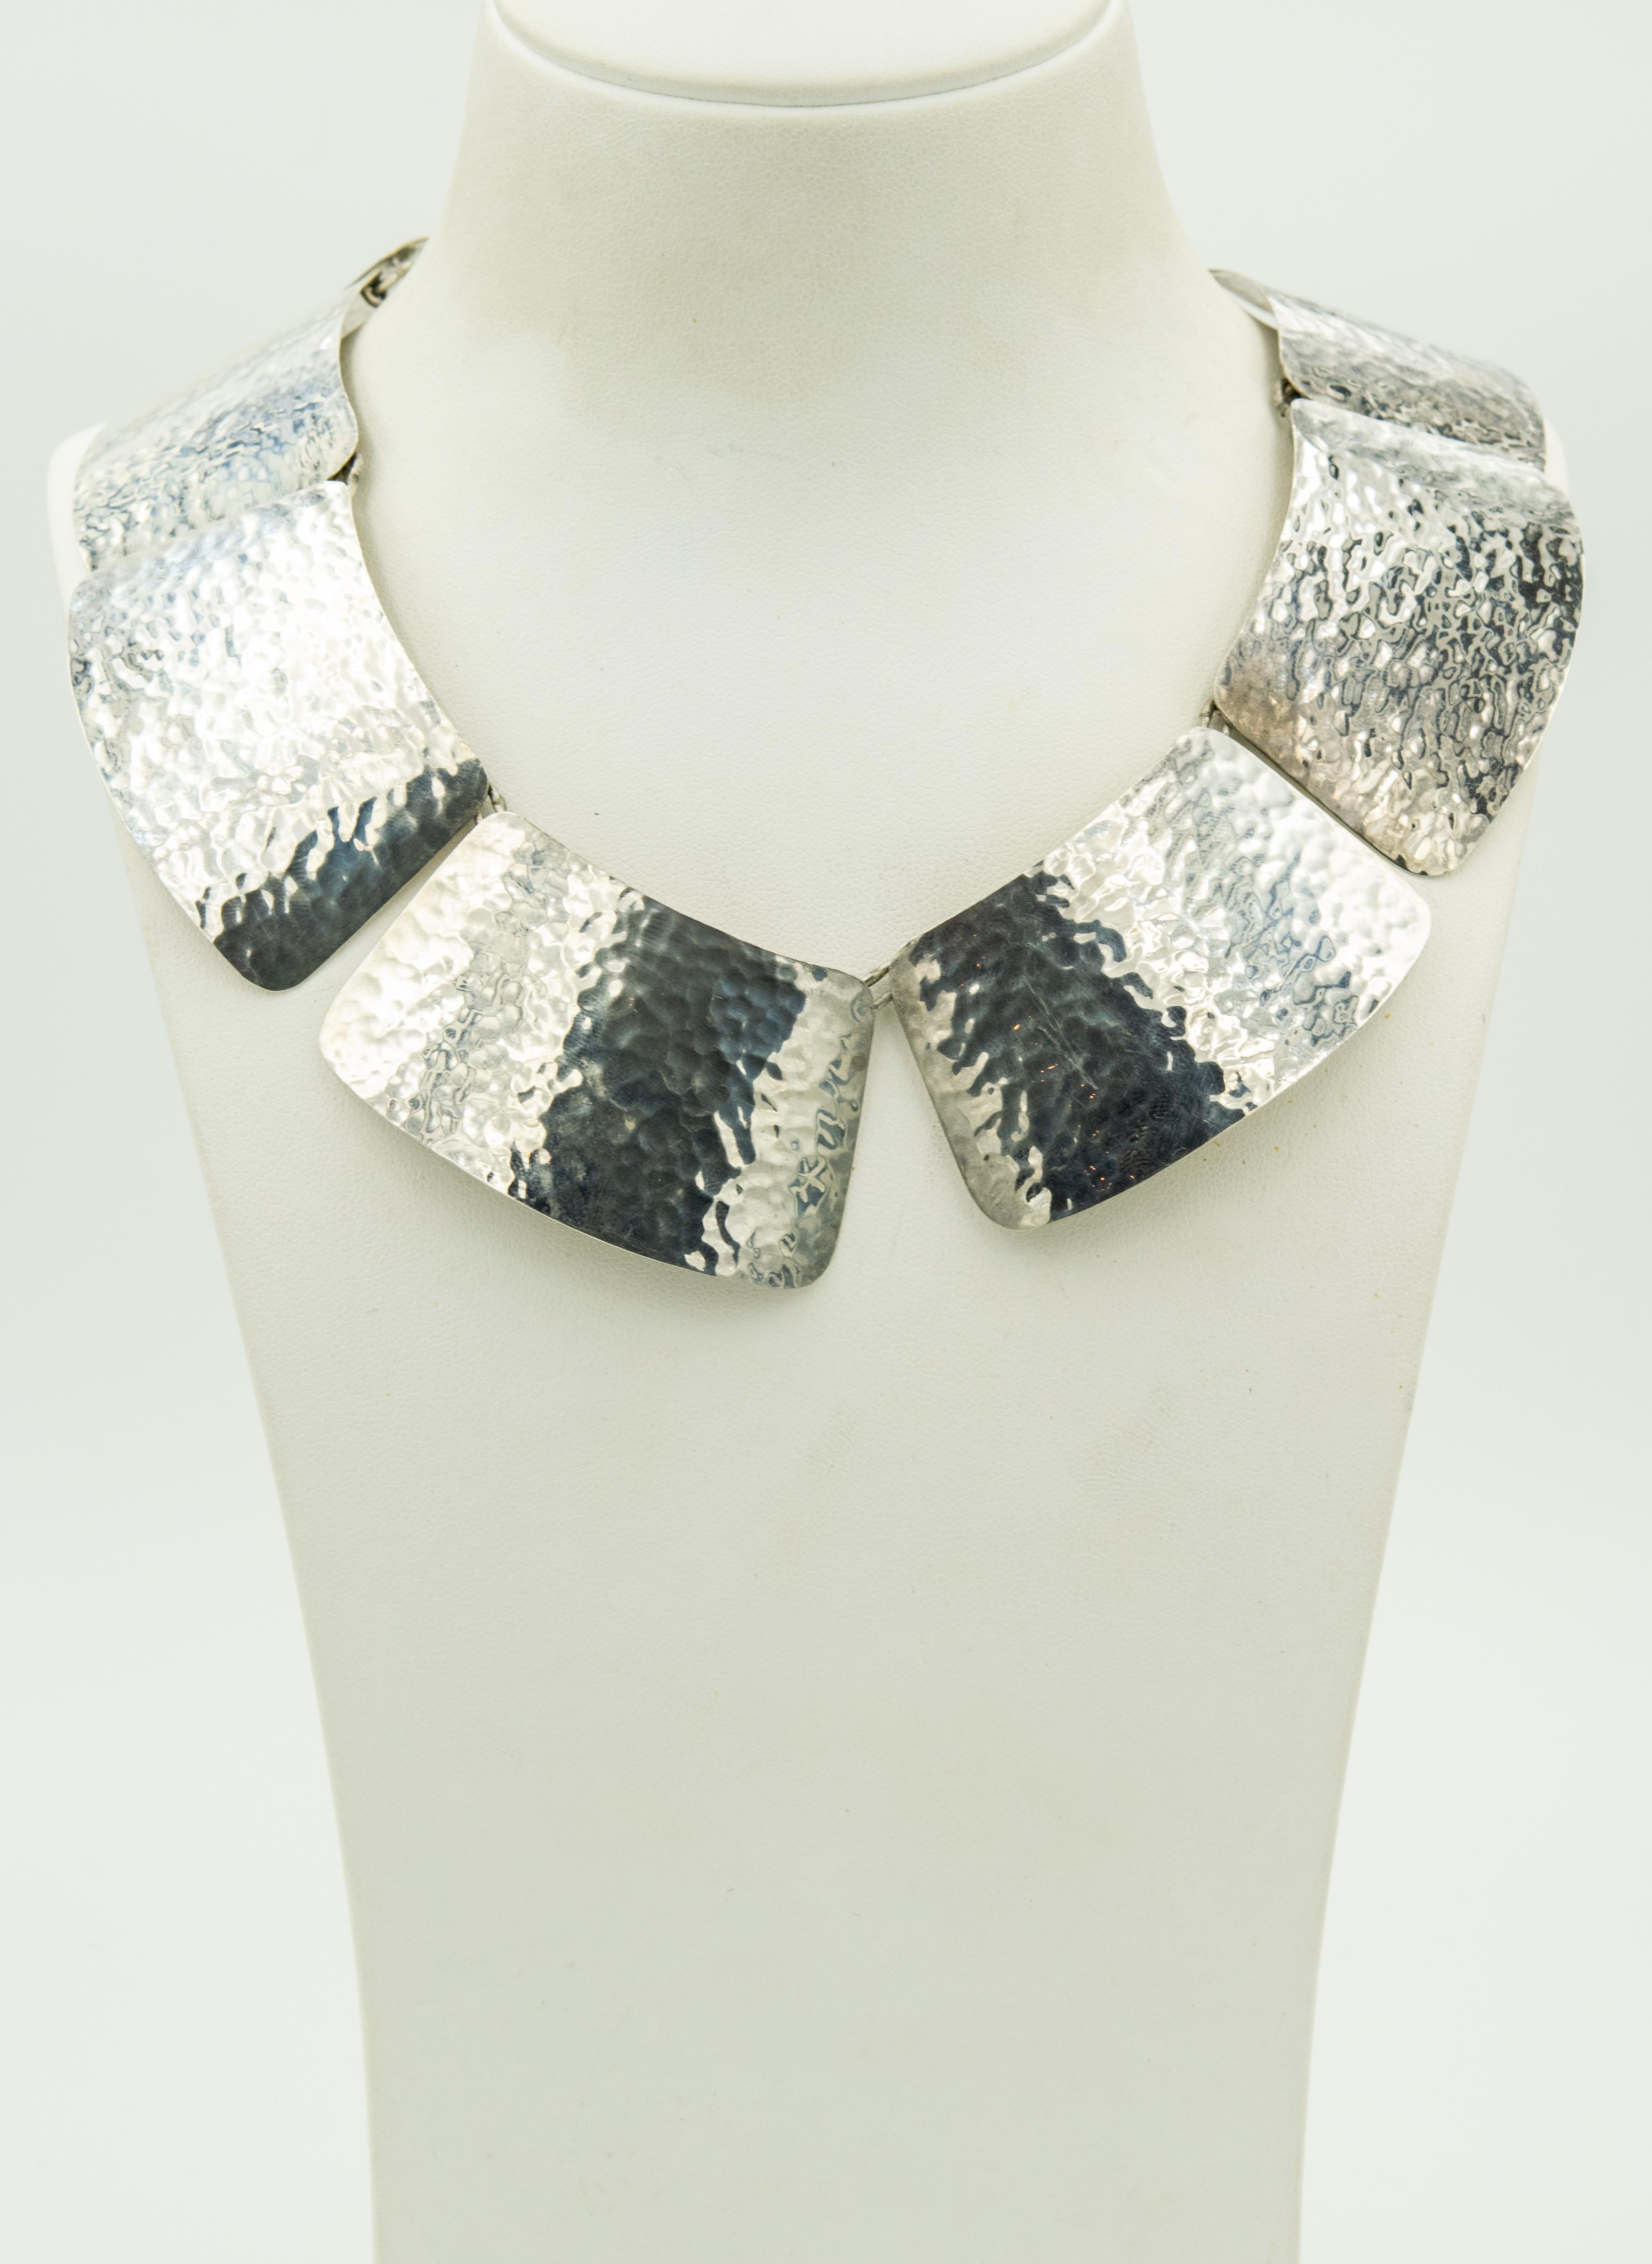 This beautiful modernist necklace was made in Mexico in the mid 20th Century.  
It features 8 hammered sterling silver slightly curved trapezoids which are linked together at the the top corners. The trapezoids measure 1.72